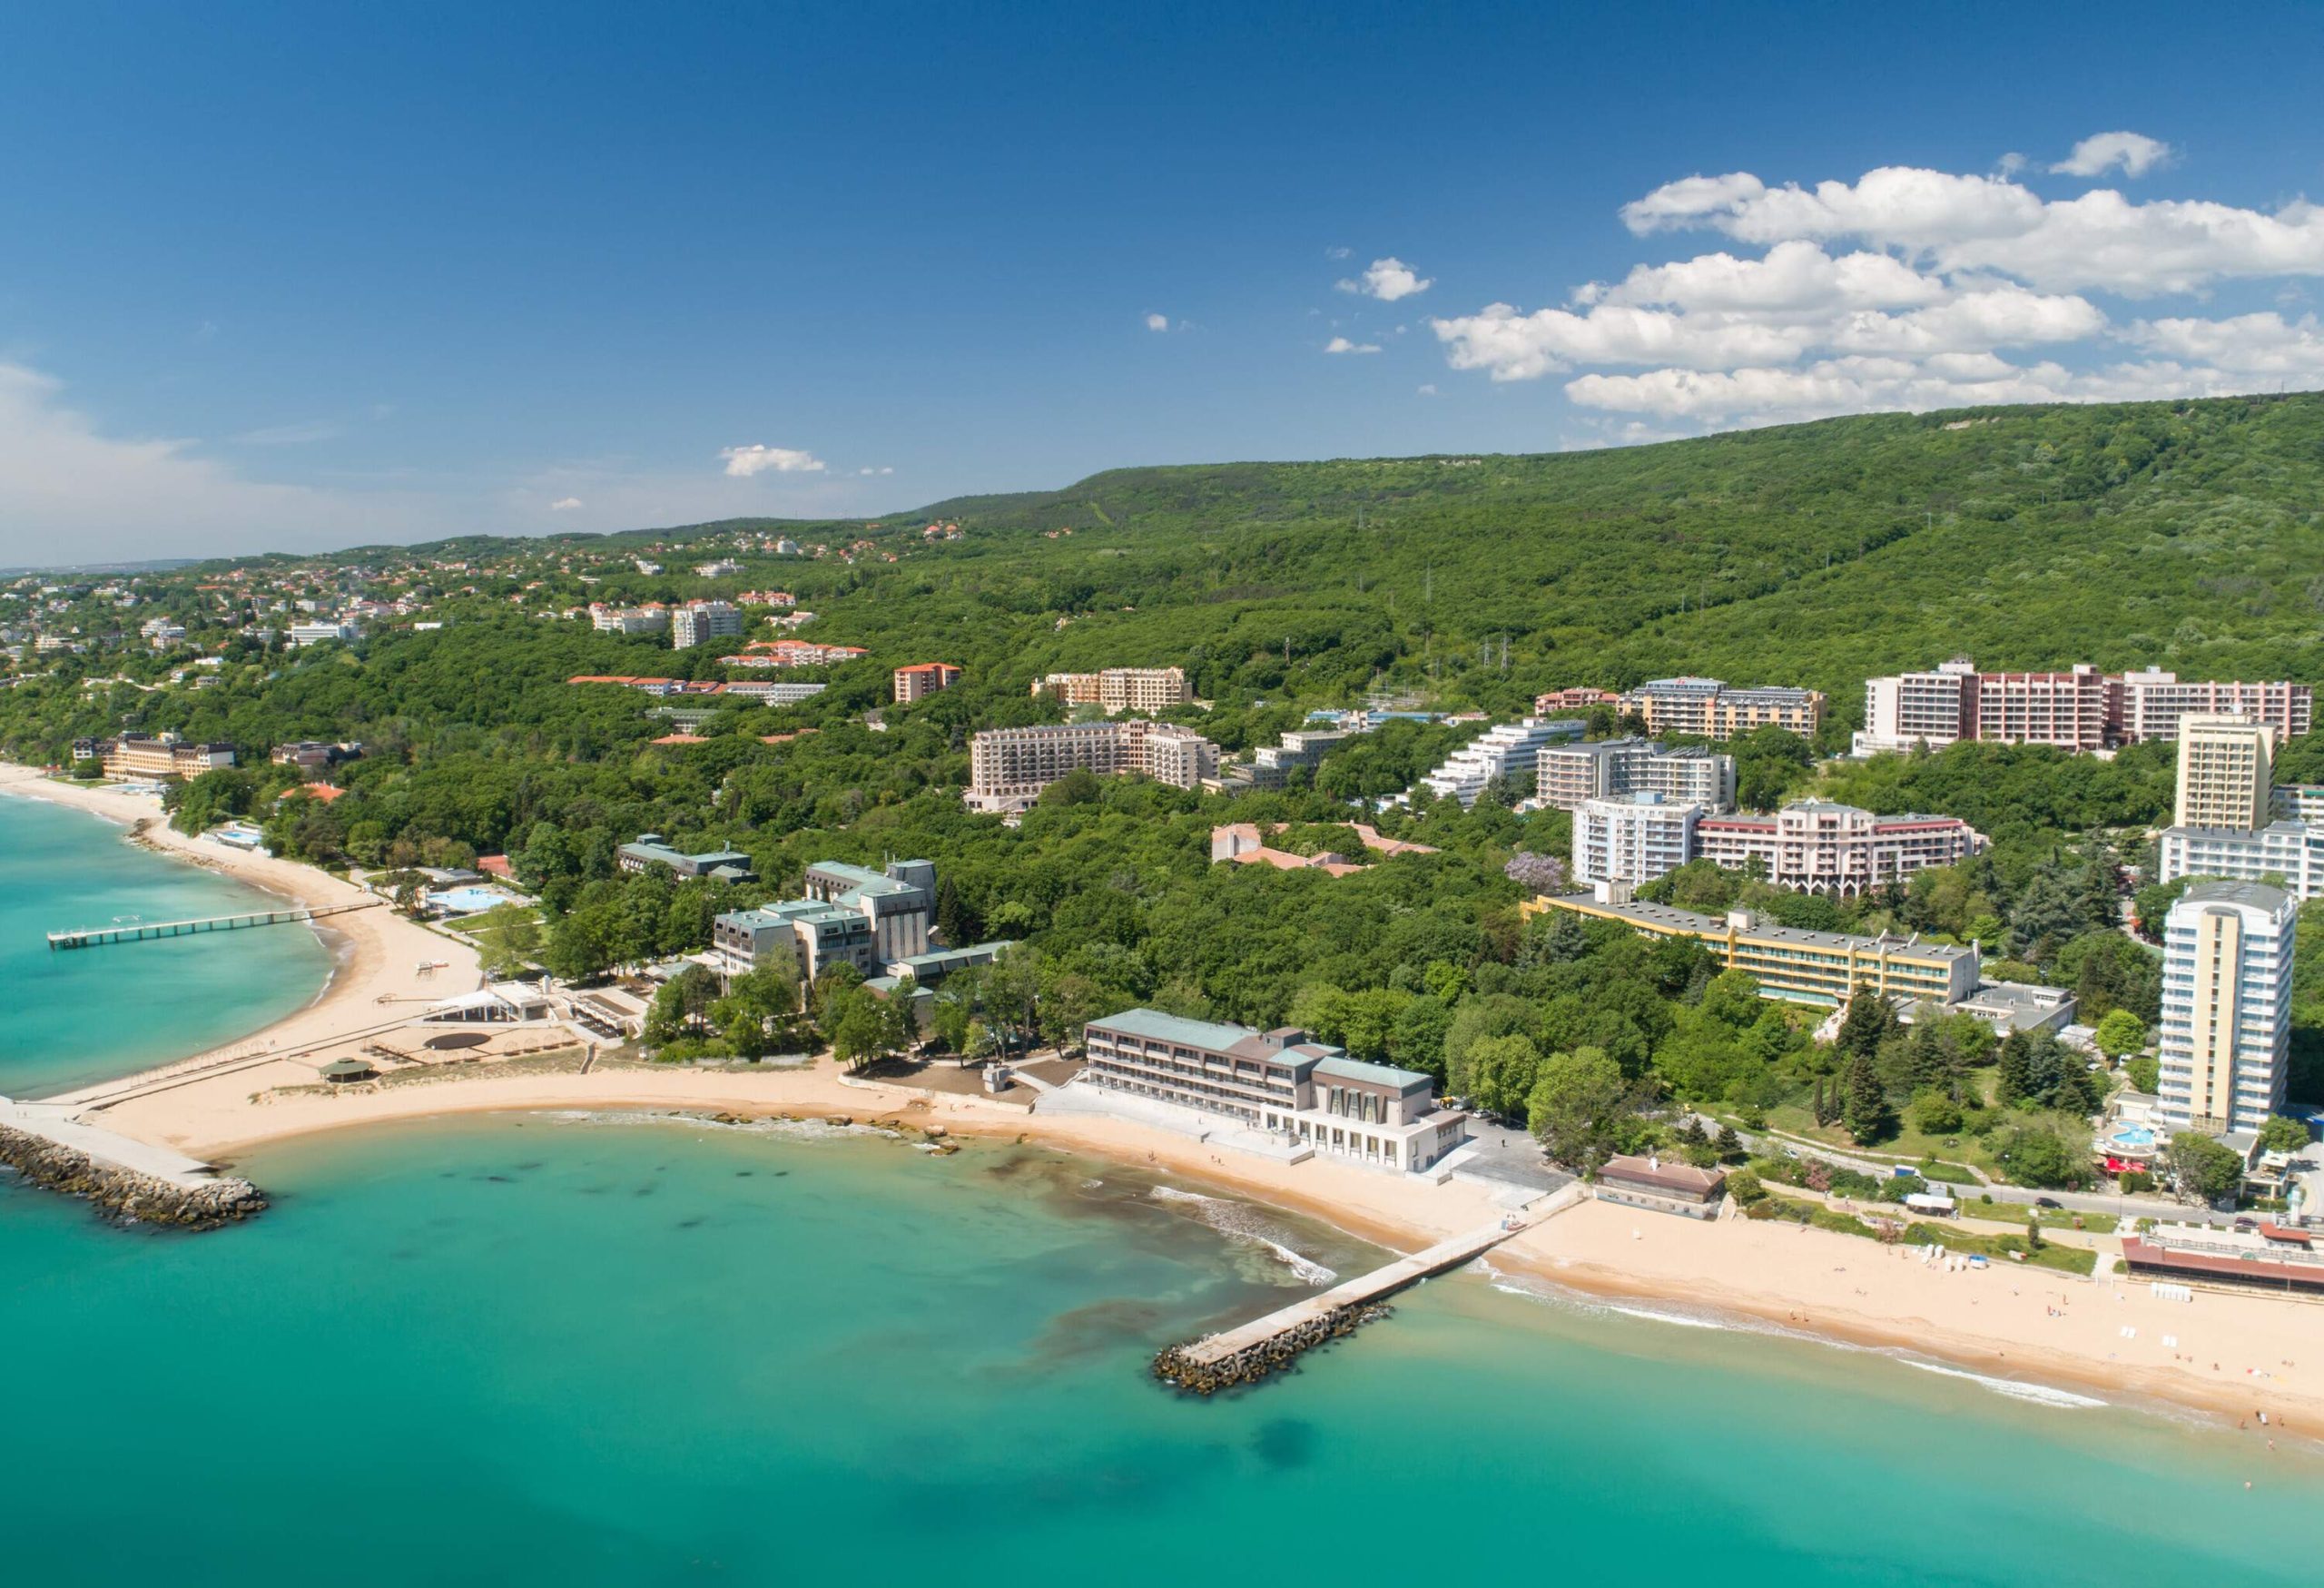 A beach with artificial breakwaters and a cluster of buildings perched on forested hills.